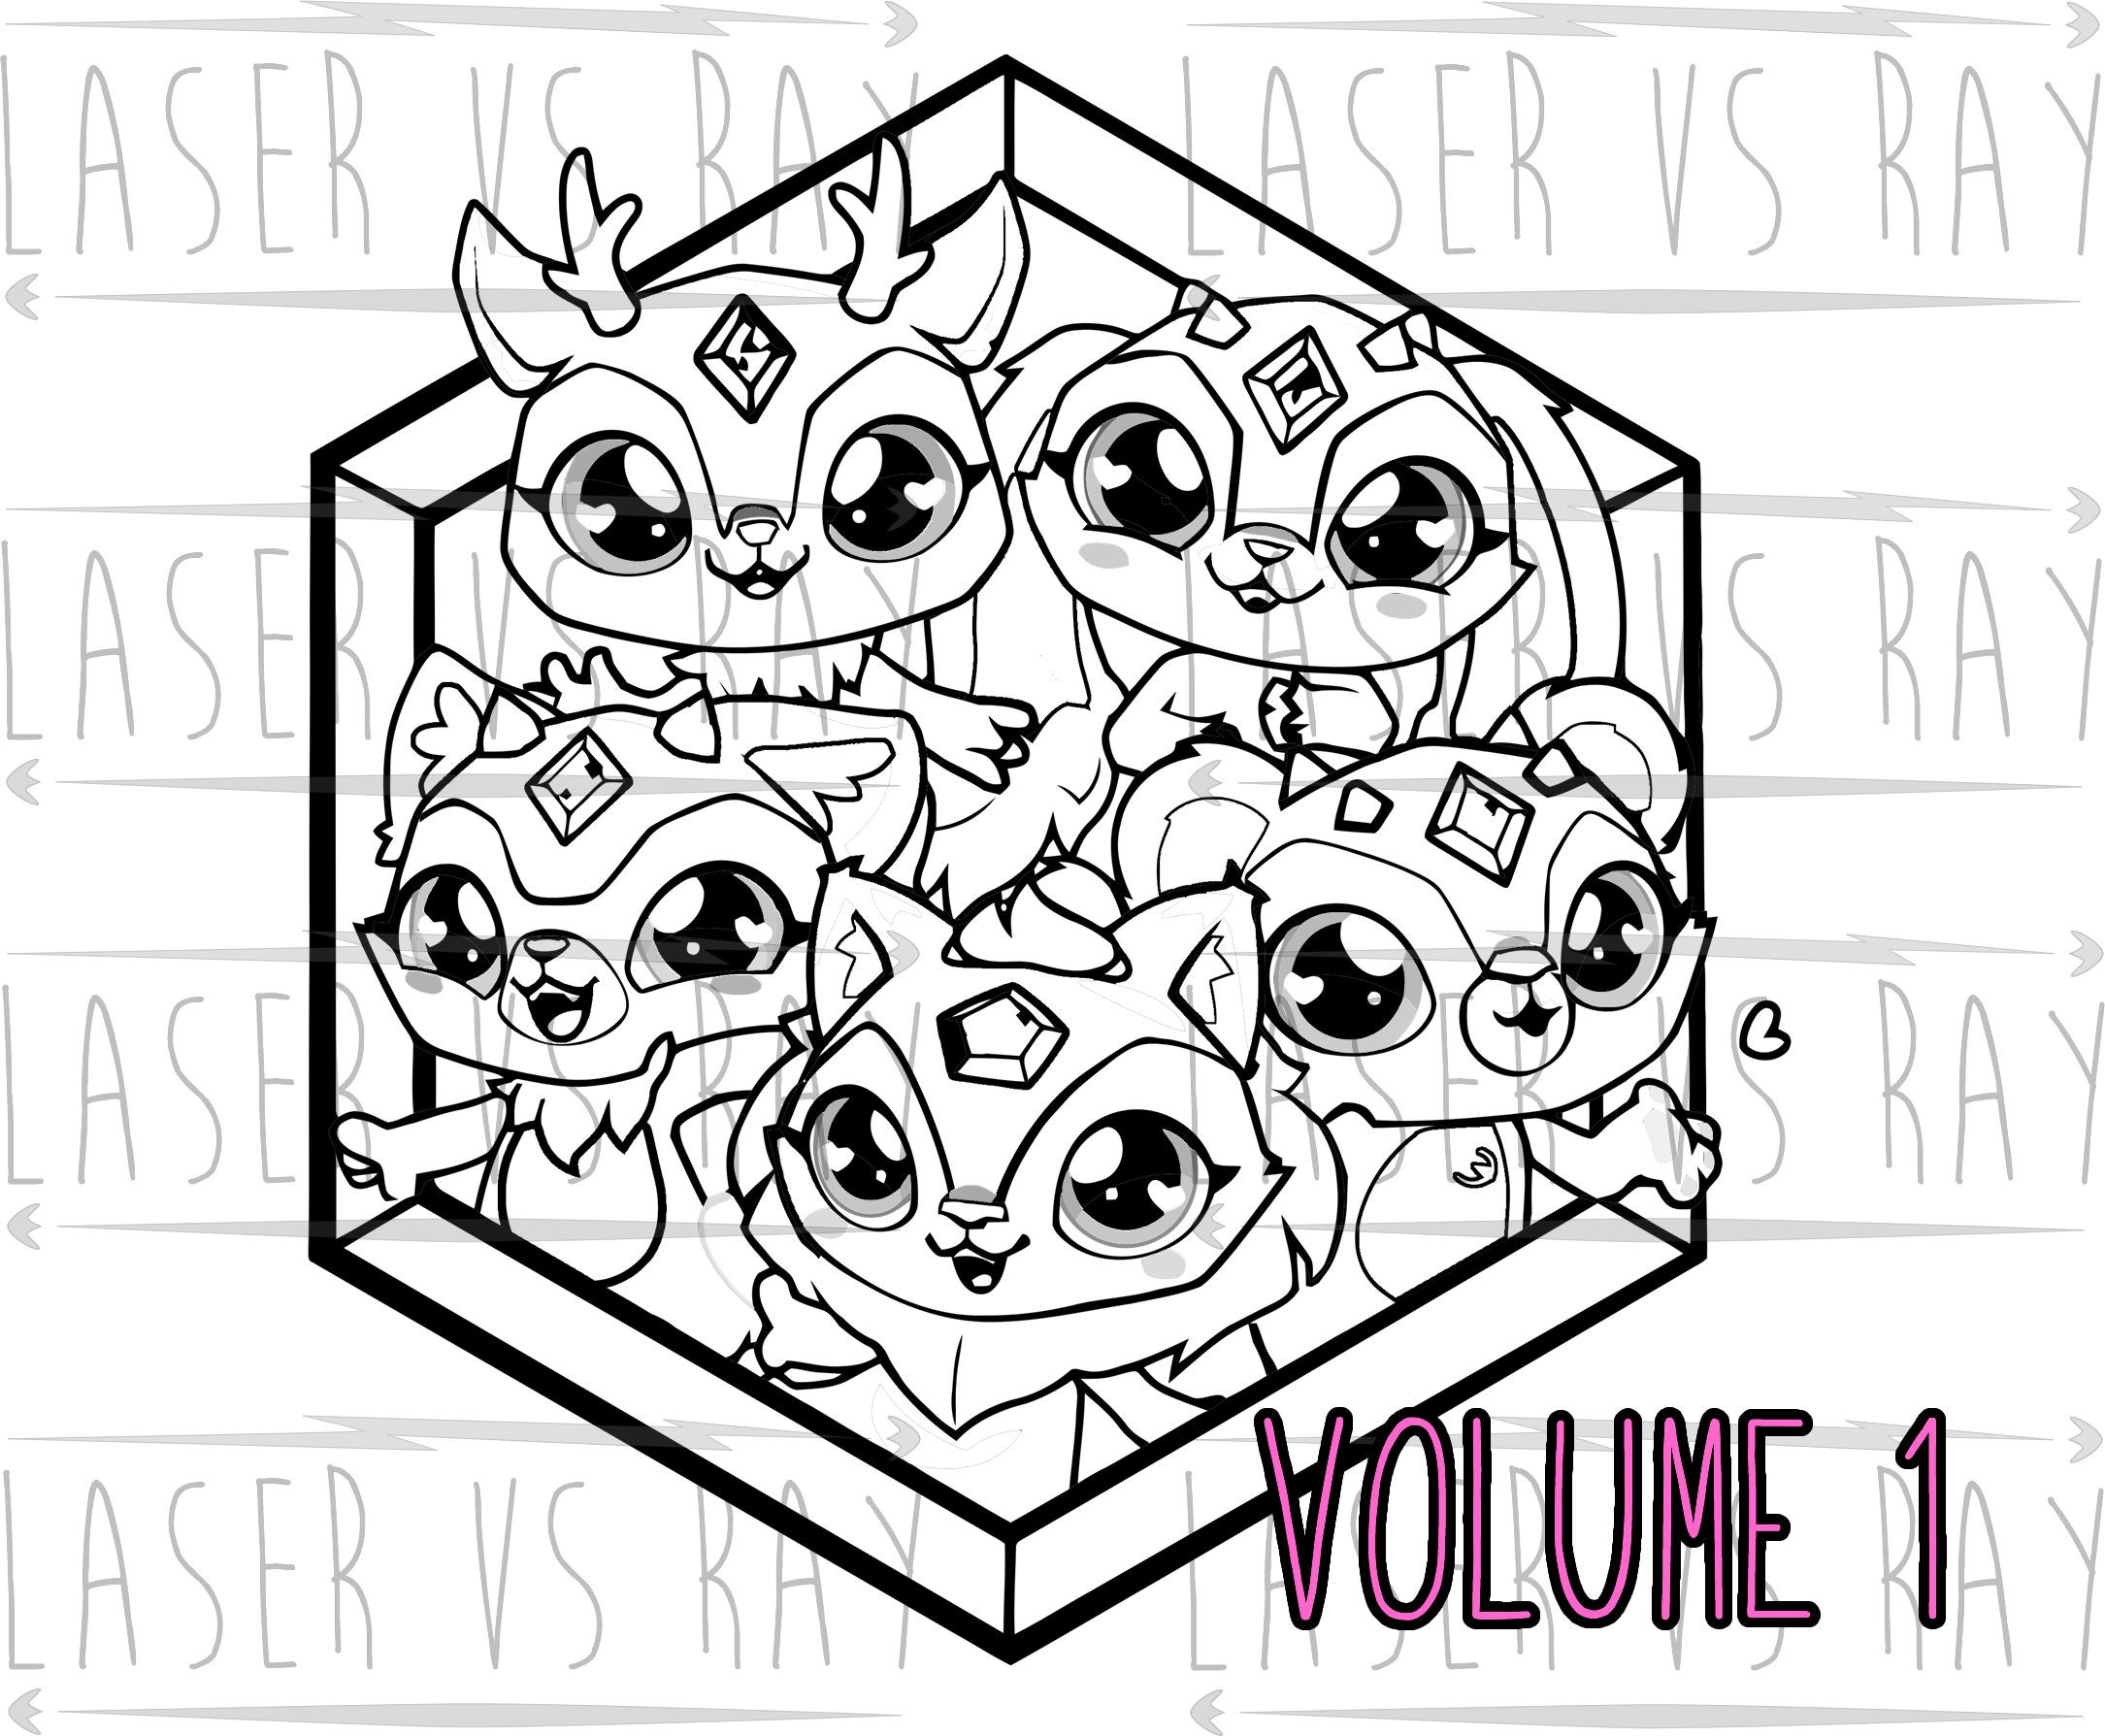 Magic mixies mixlings coloring page printable coloring page downloadable coloring sheet coloring pages for kids volume